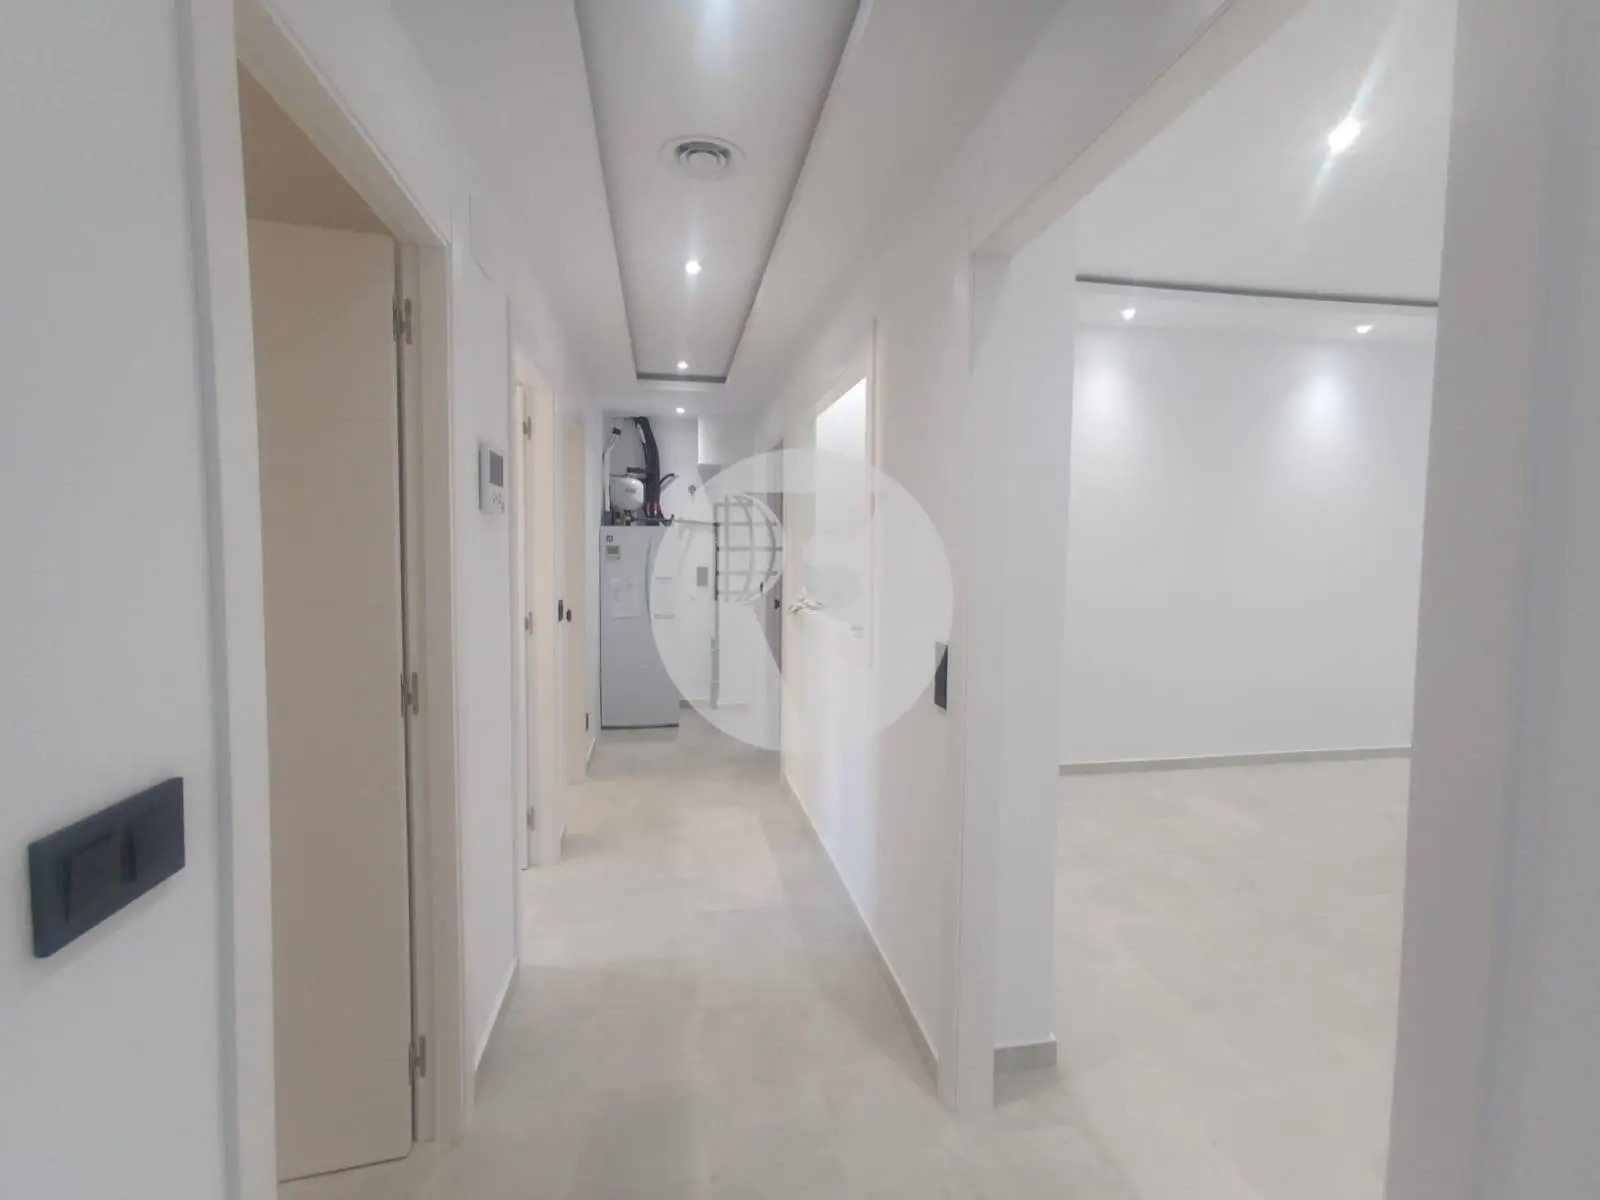 Ground floor of 92 m² in the center of Granollers. 11